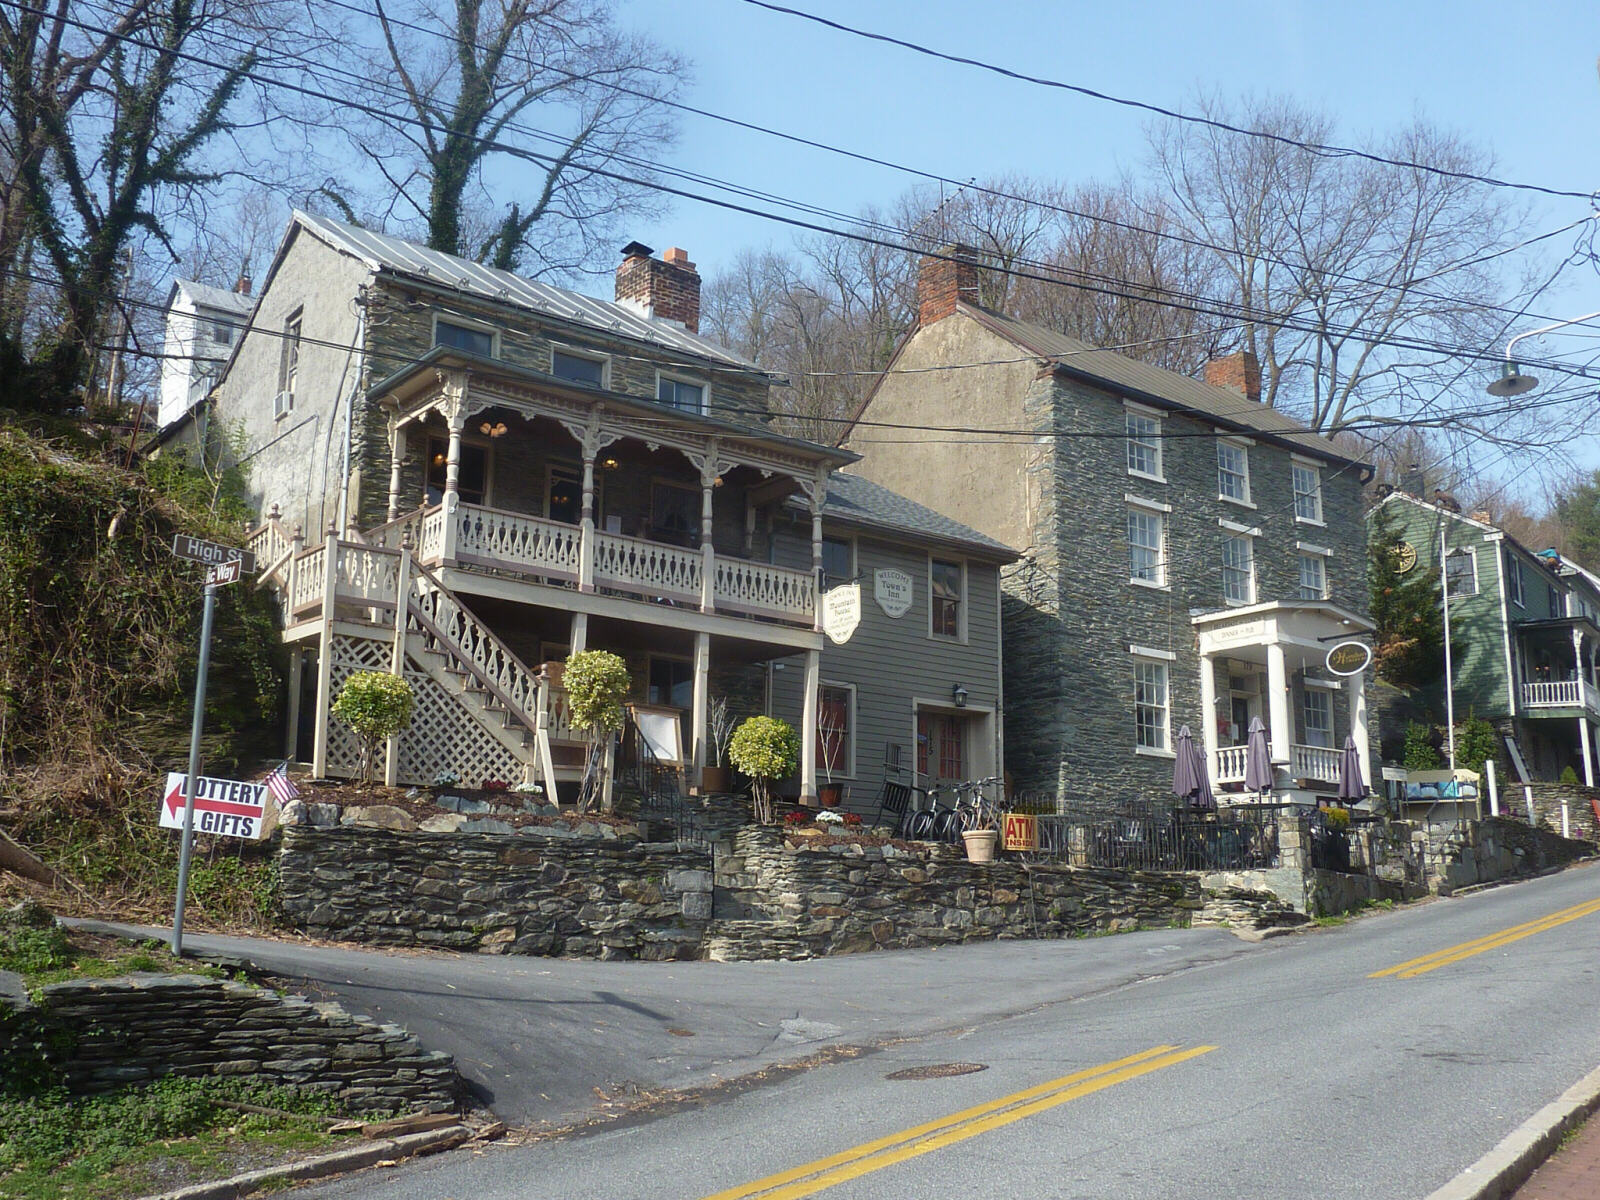 Towns Inn in the High Street, Harpers Ferry